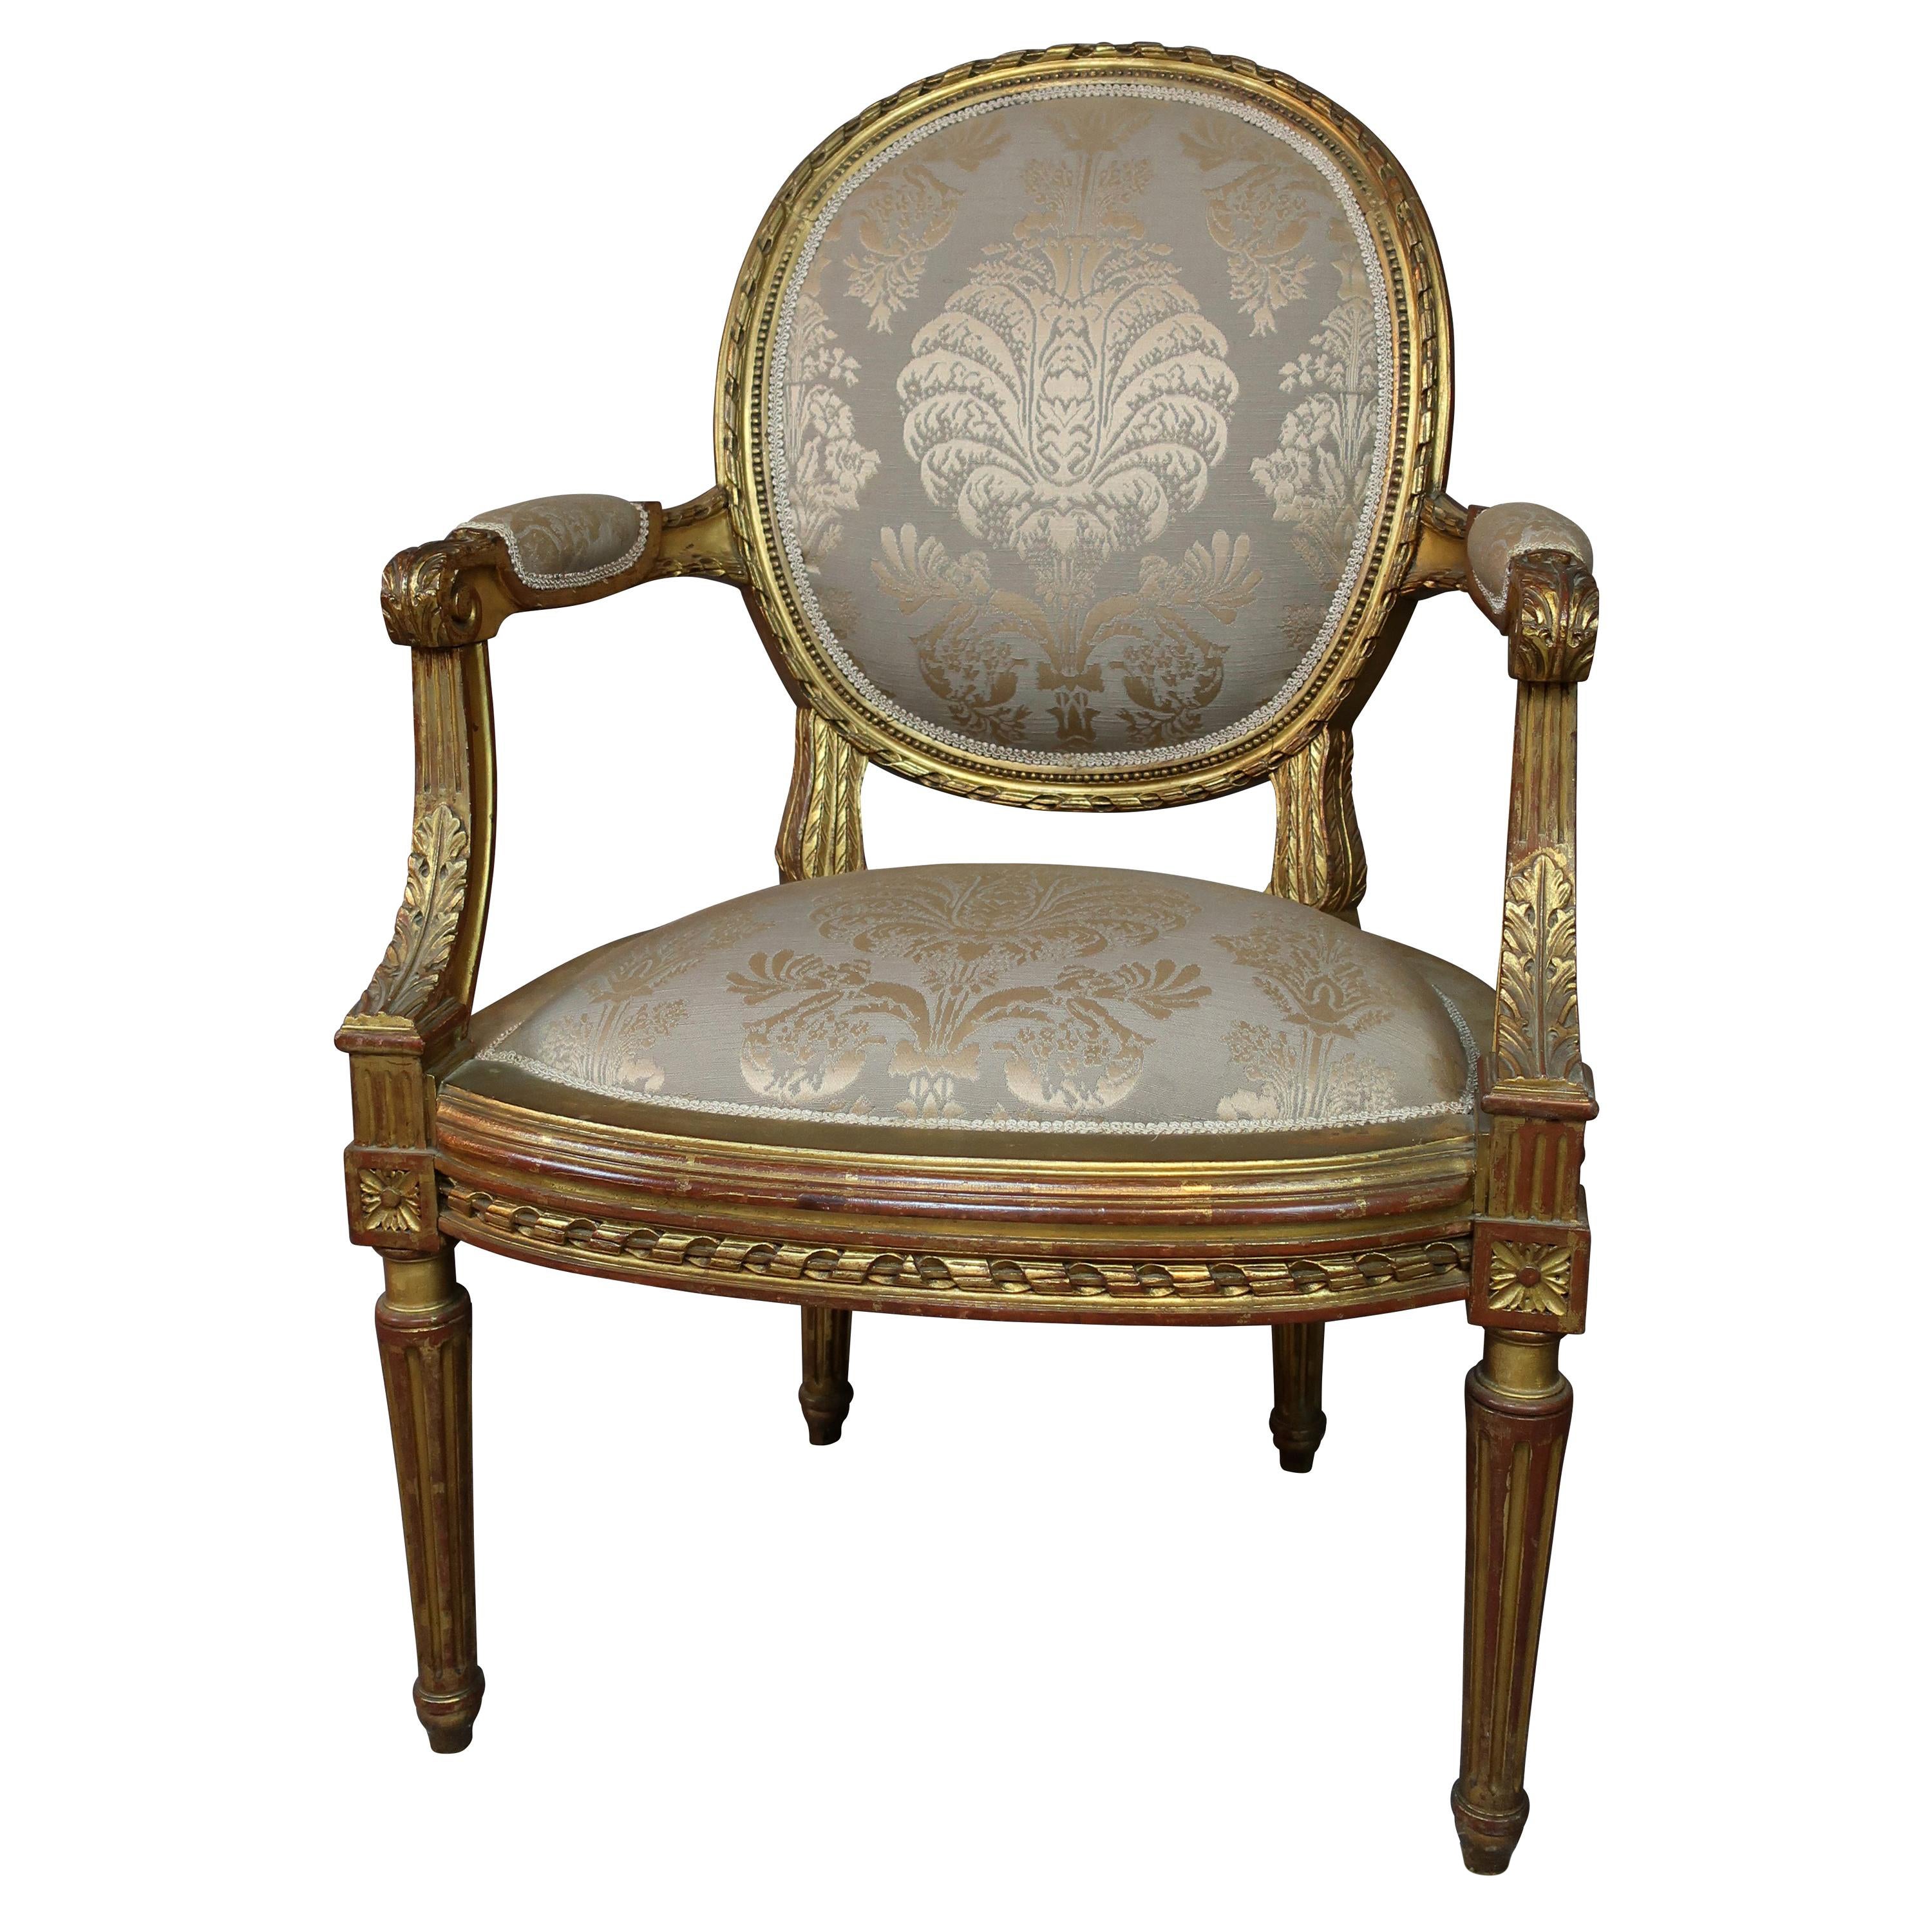 Louis XVI Style French Gilt Chair with Antique Damask Grey/Taupe Fabric For Sale